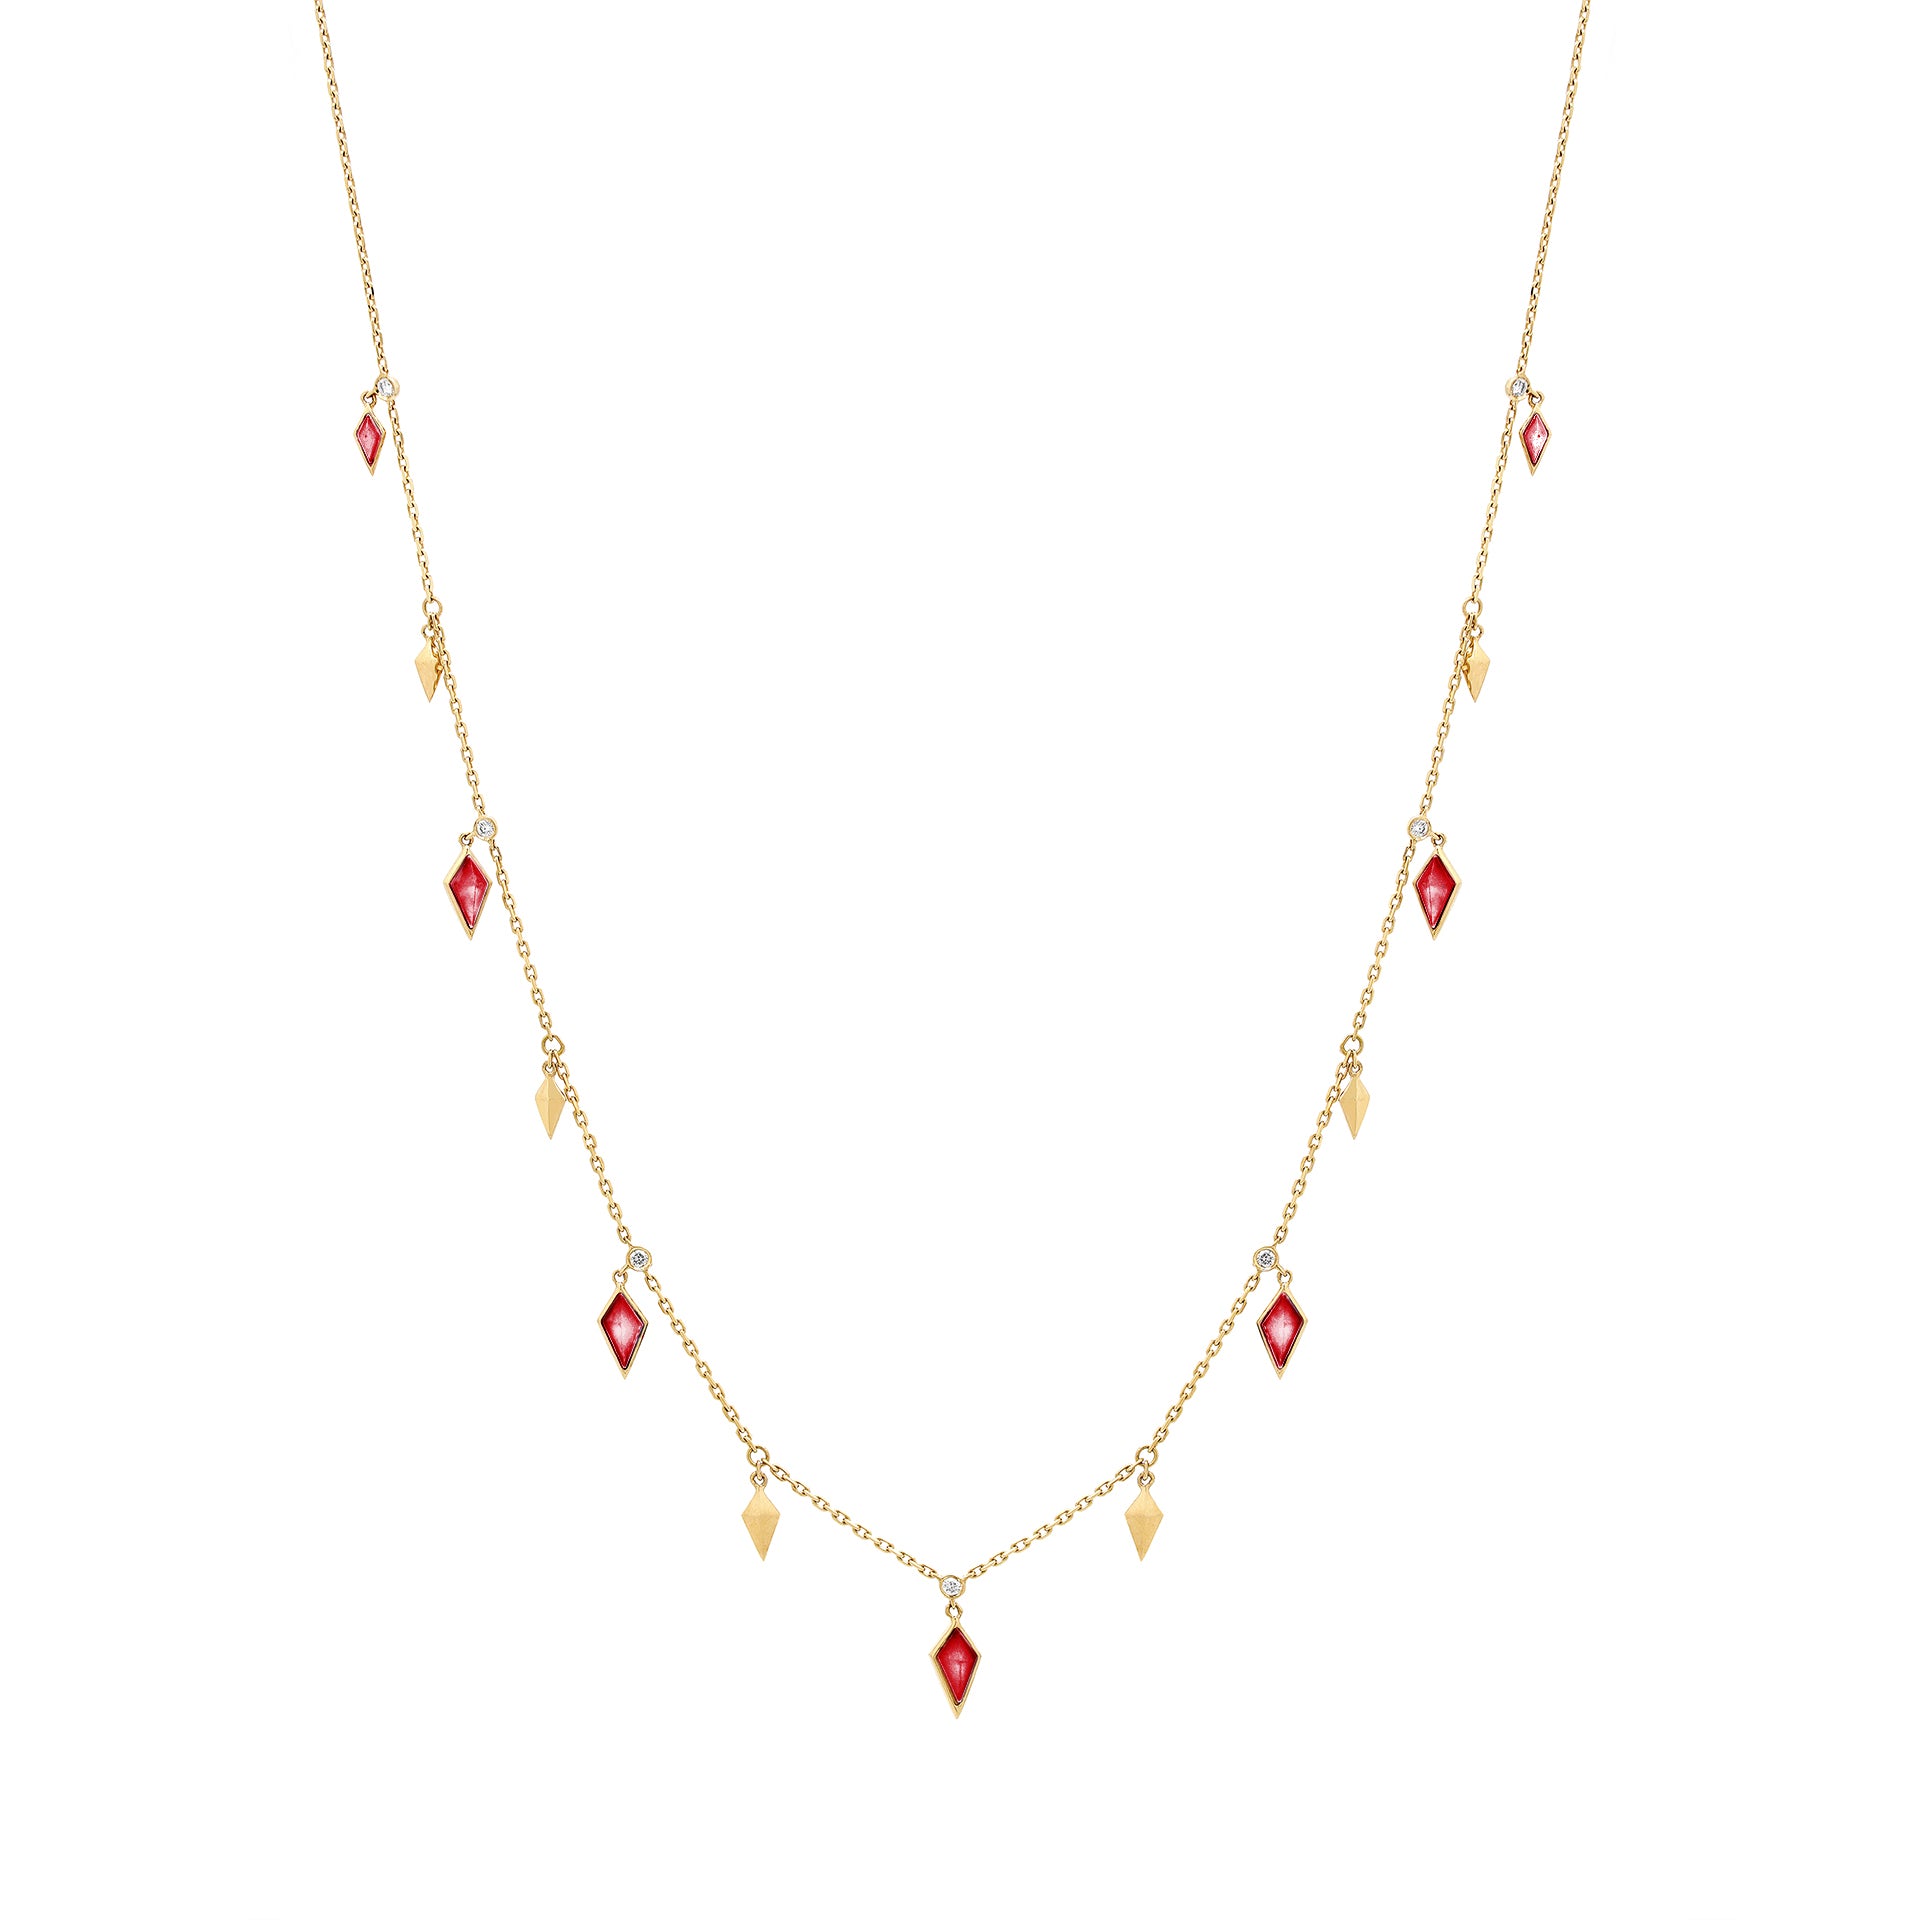 Al Merta’shah Necklace in Diamonds and Red Agate